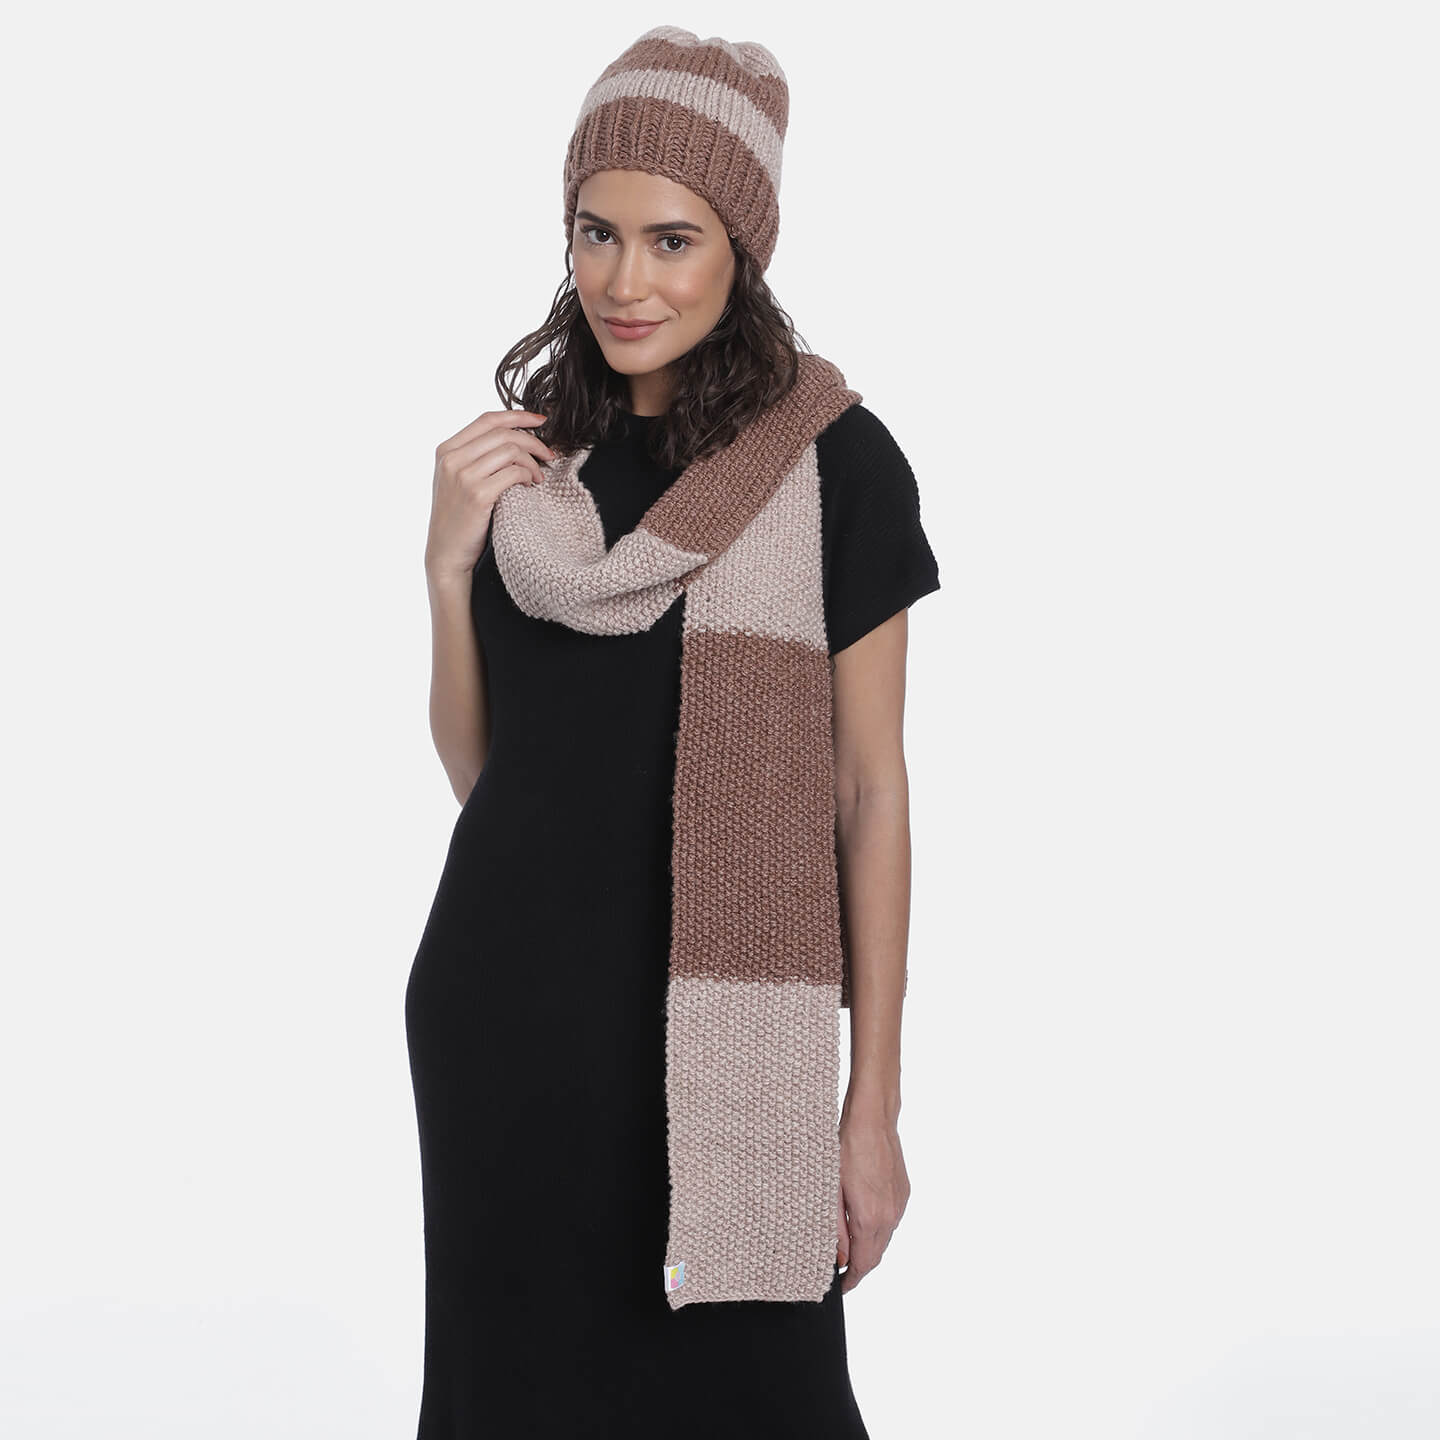 Beanie and Scarf Coordinating Set - 3302